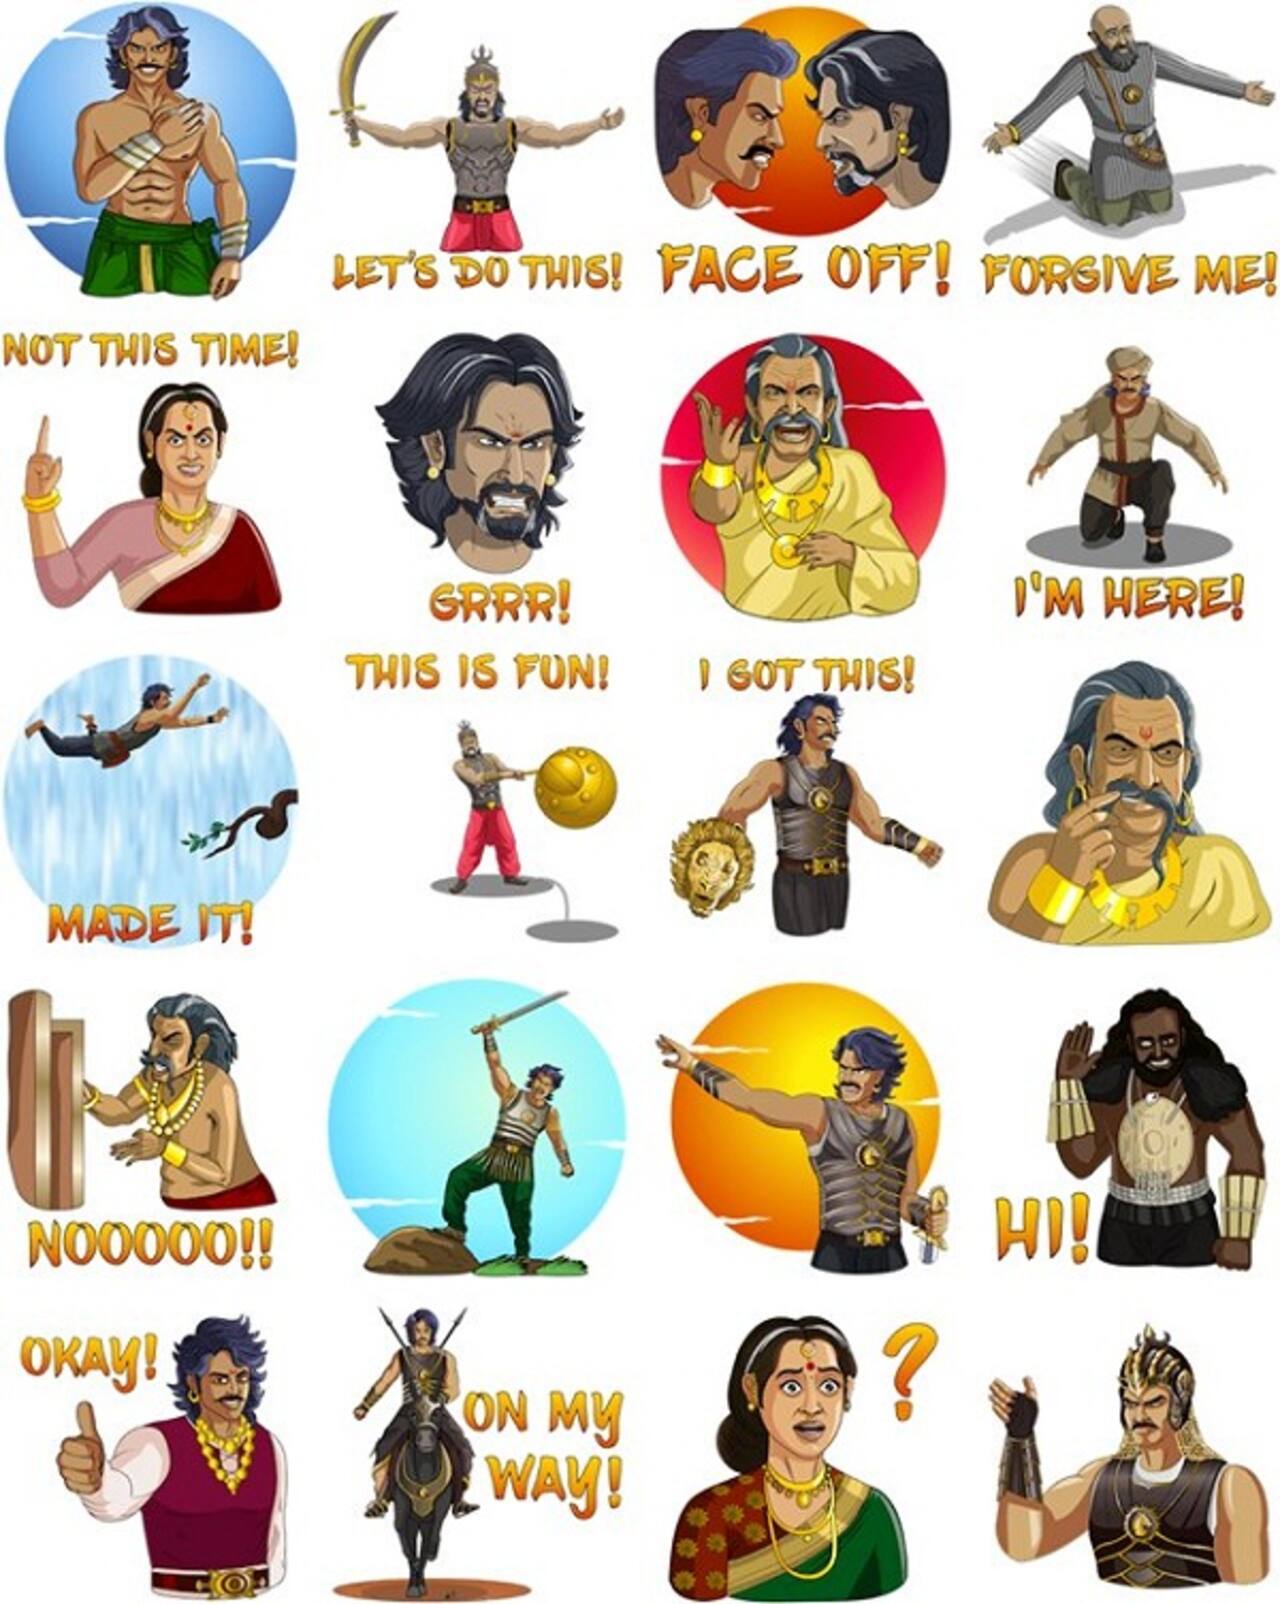 After graphic novels, animated series, Prabhas' Baahubali 2 is now out with  Facebook stickers - Bollywood News & Gossip, Movie Reviews, Trailers &  Videos at 